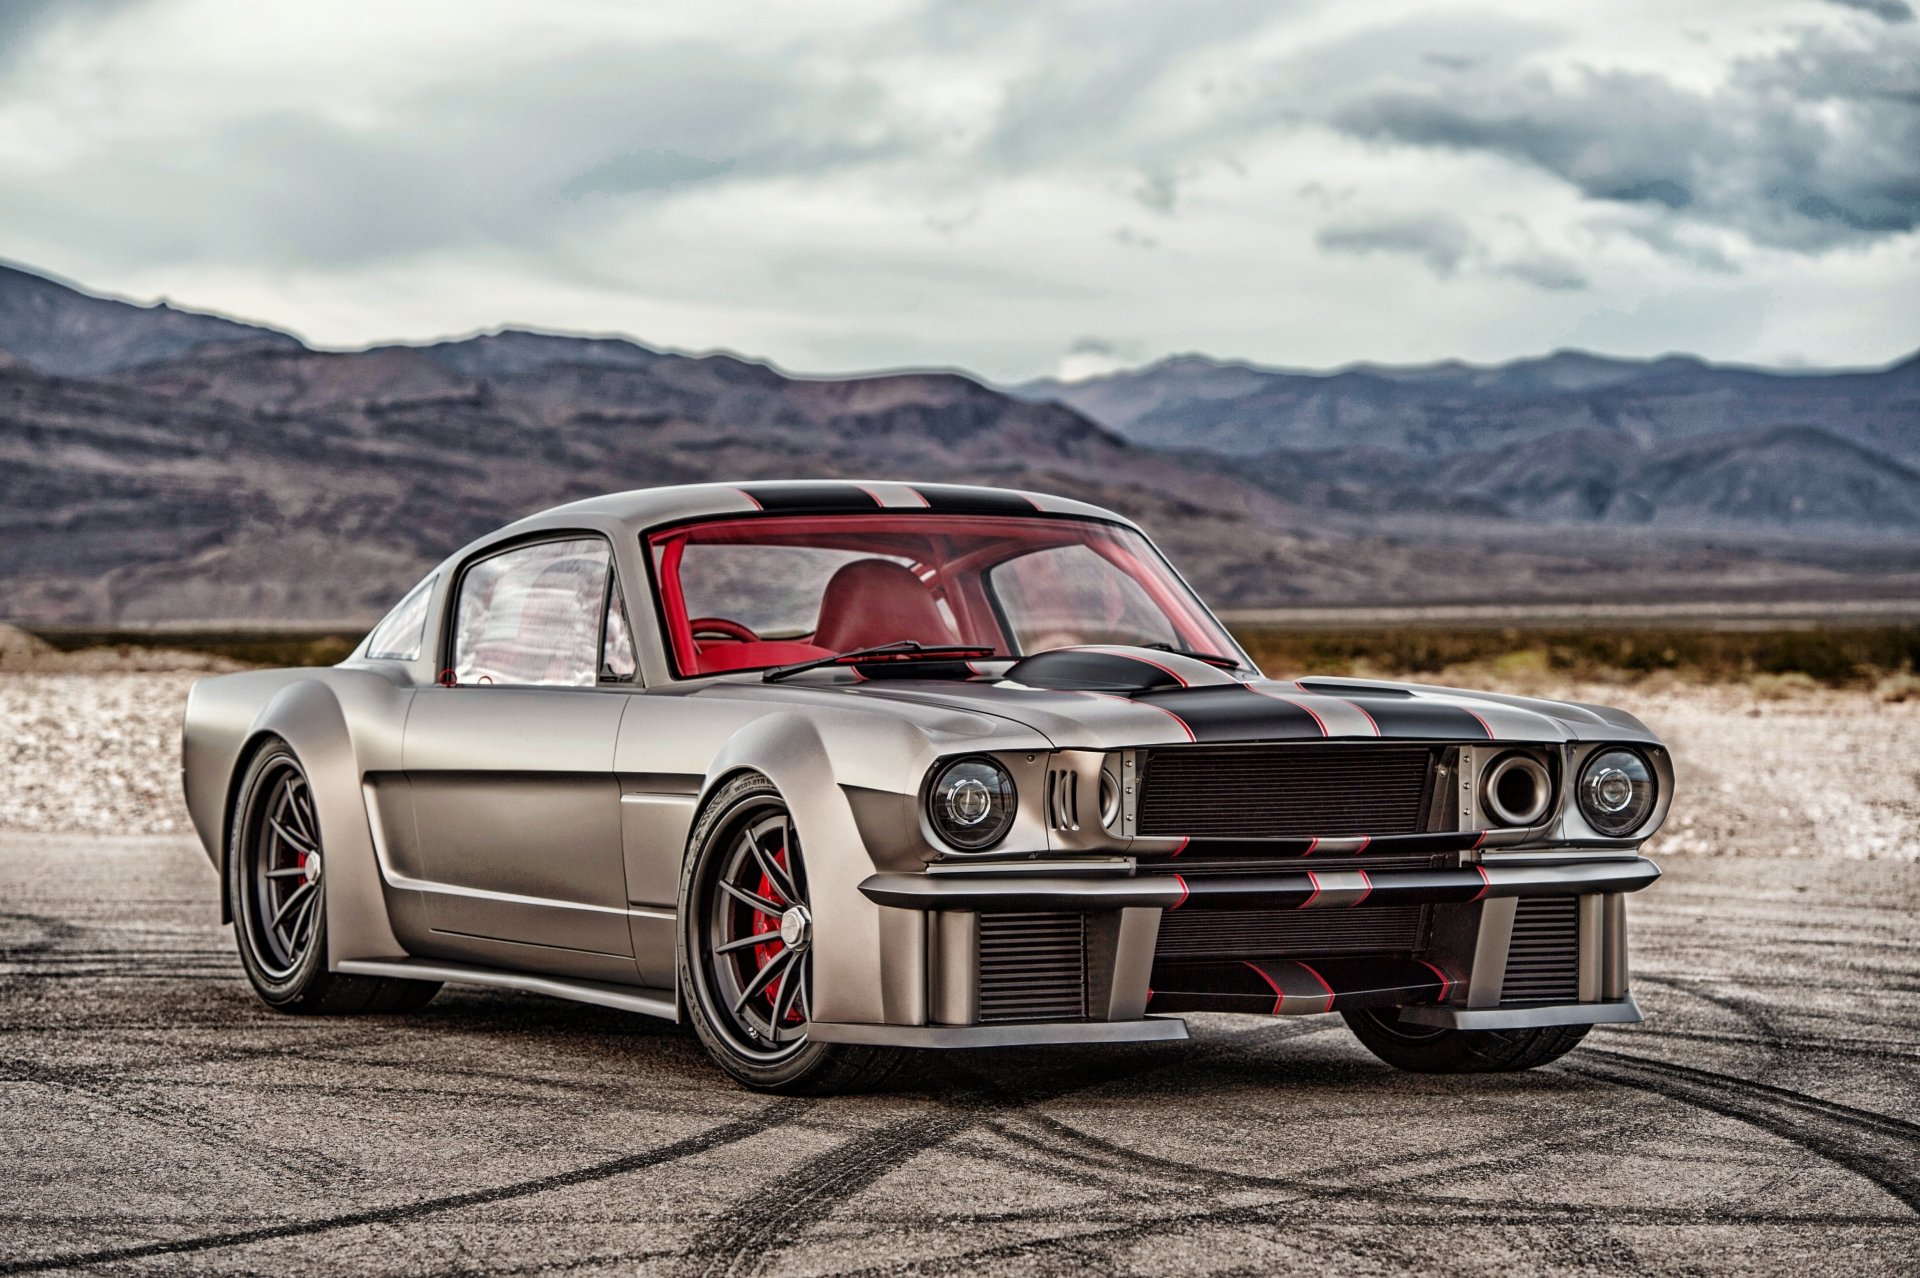 Ford Mustang 4k Ultra HD Wallpaper | Background Image | 4096x2726 | ID